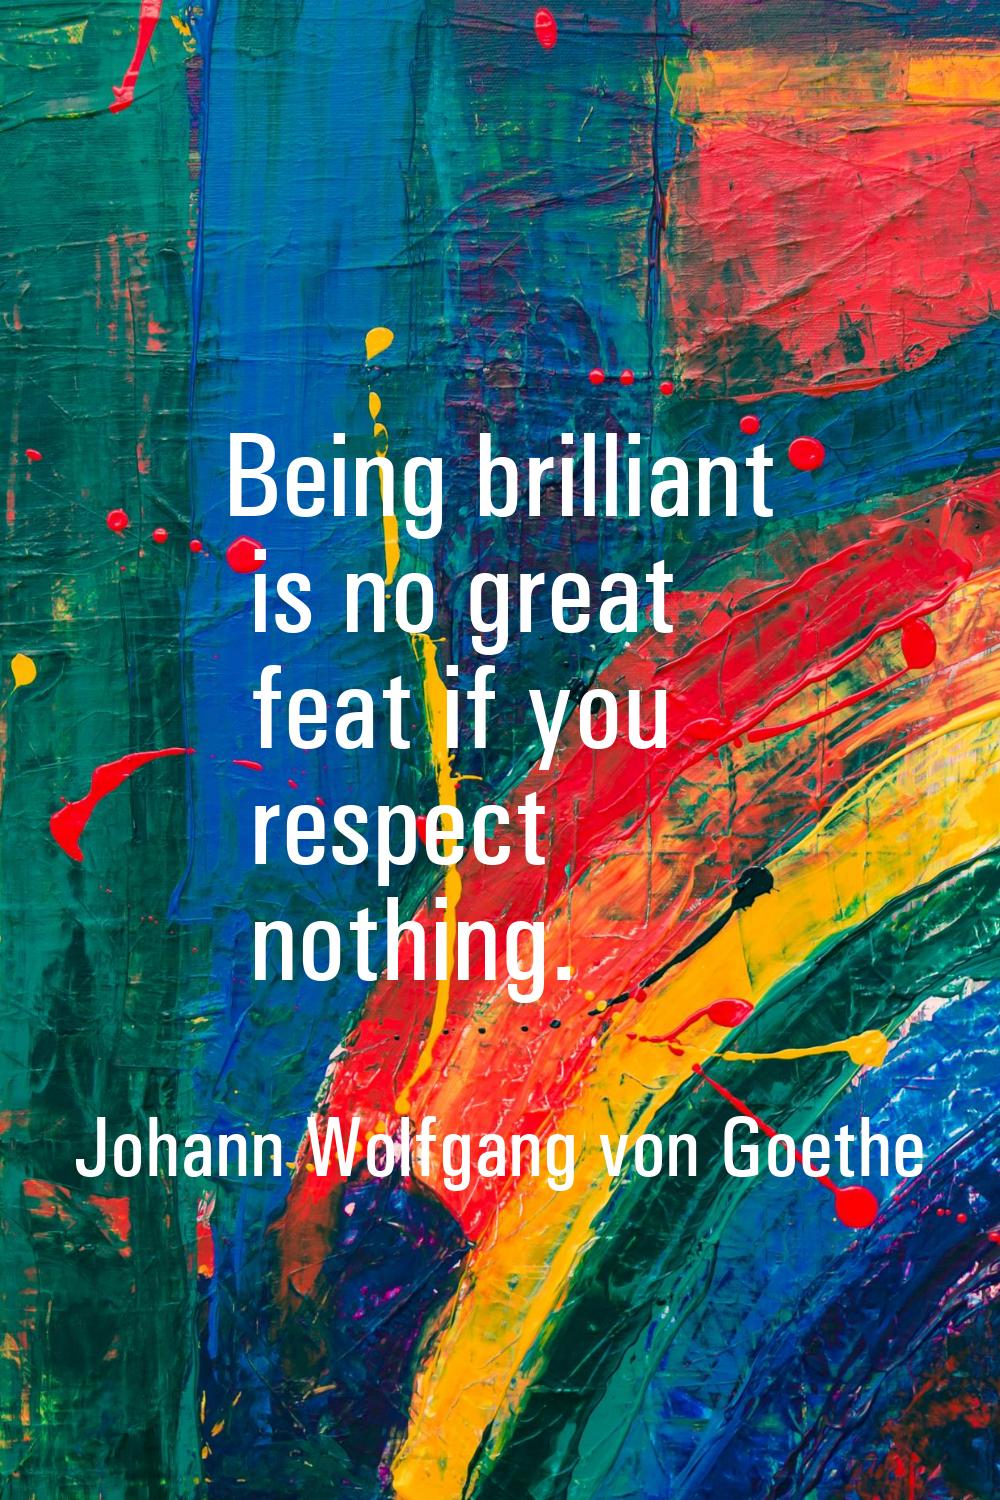 Being brilliant is no great feat if you respect nothing.